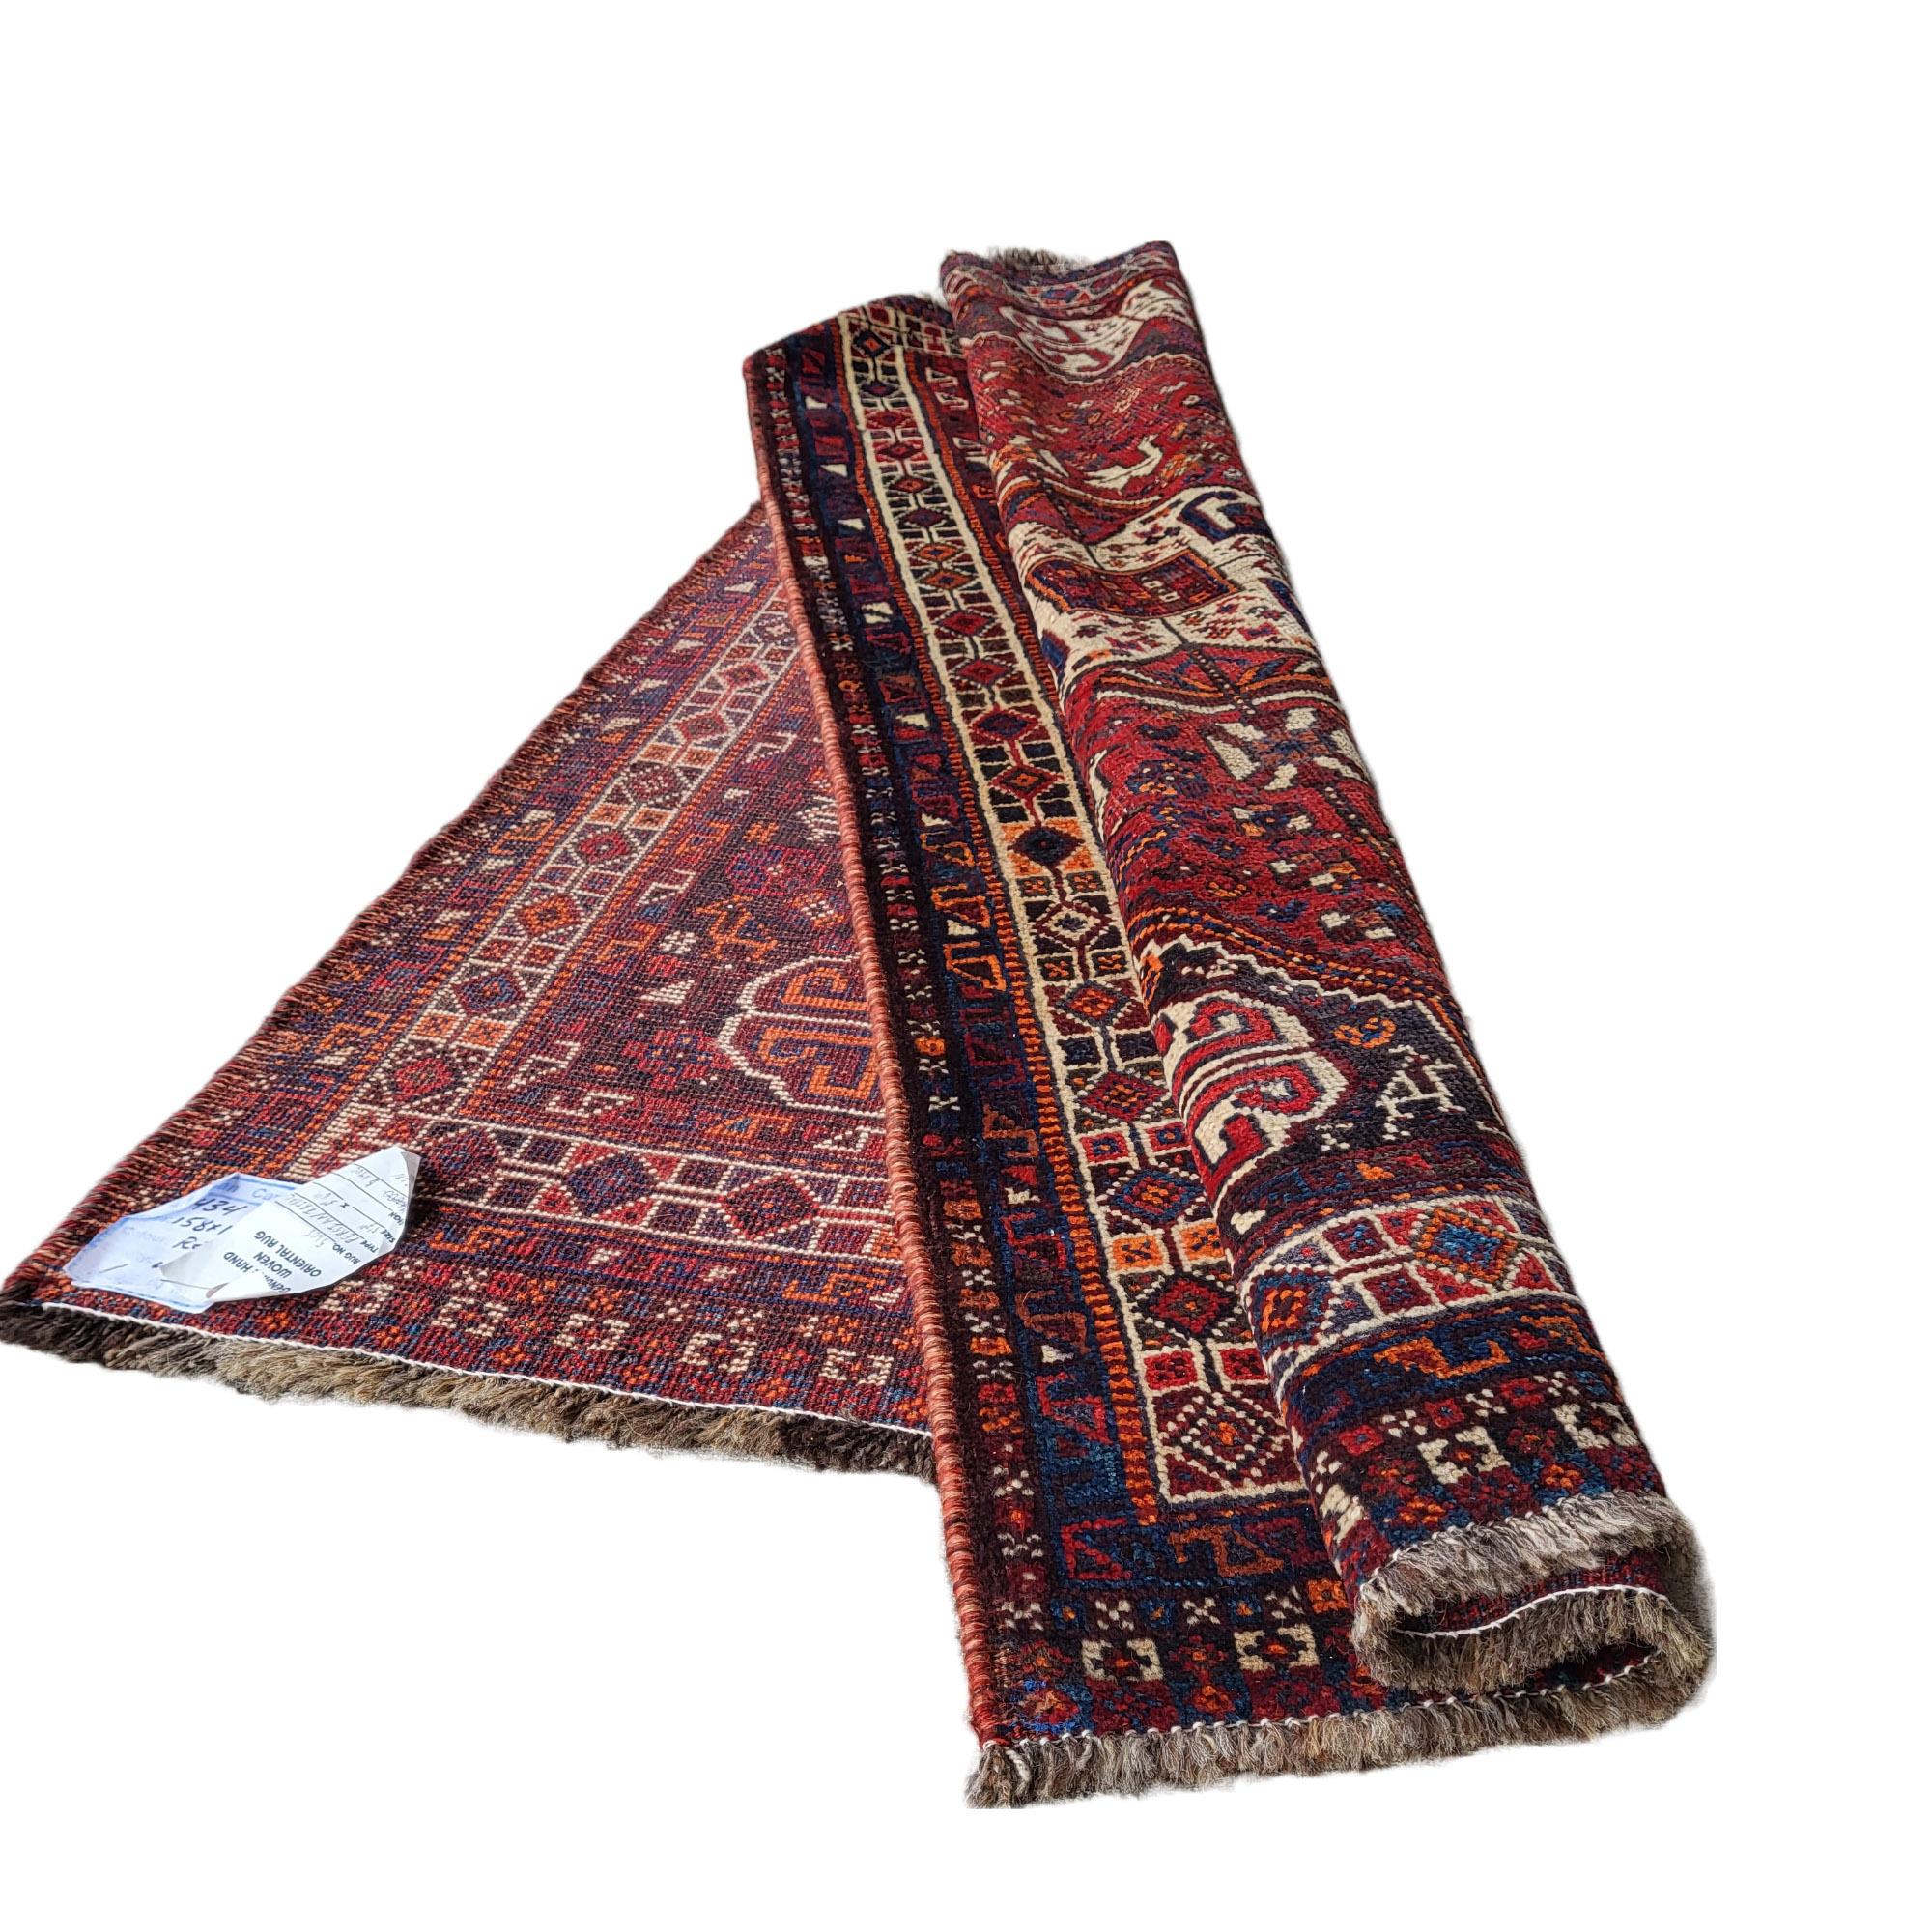 Intricate, Antique Nomadic Persian Art 3'6x5'

Labeled as a qashqai due to its styling, this rare piece is actually woven by the Arab Fars tribe of Iran. An obscure tribe who's works are highly sought after by collectors.

Made from Persian wool